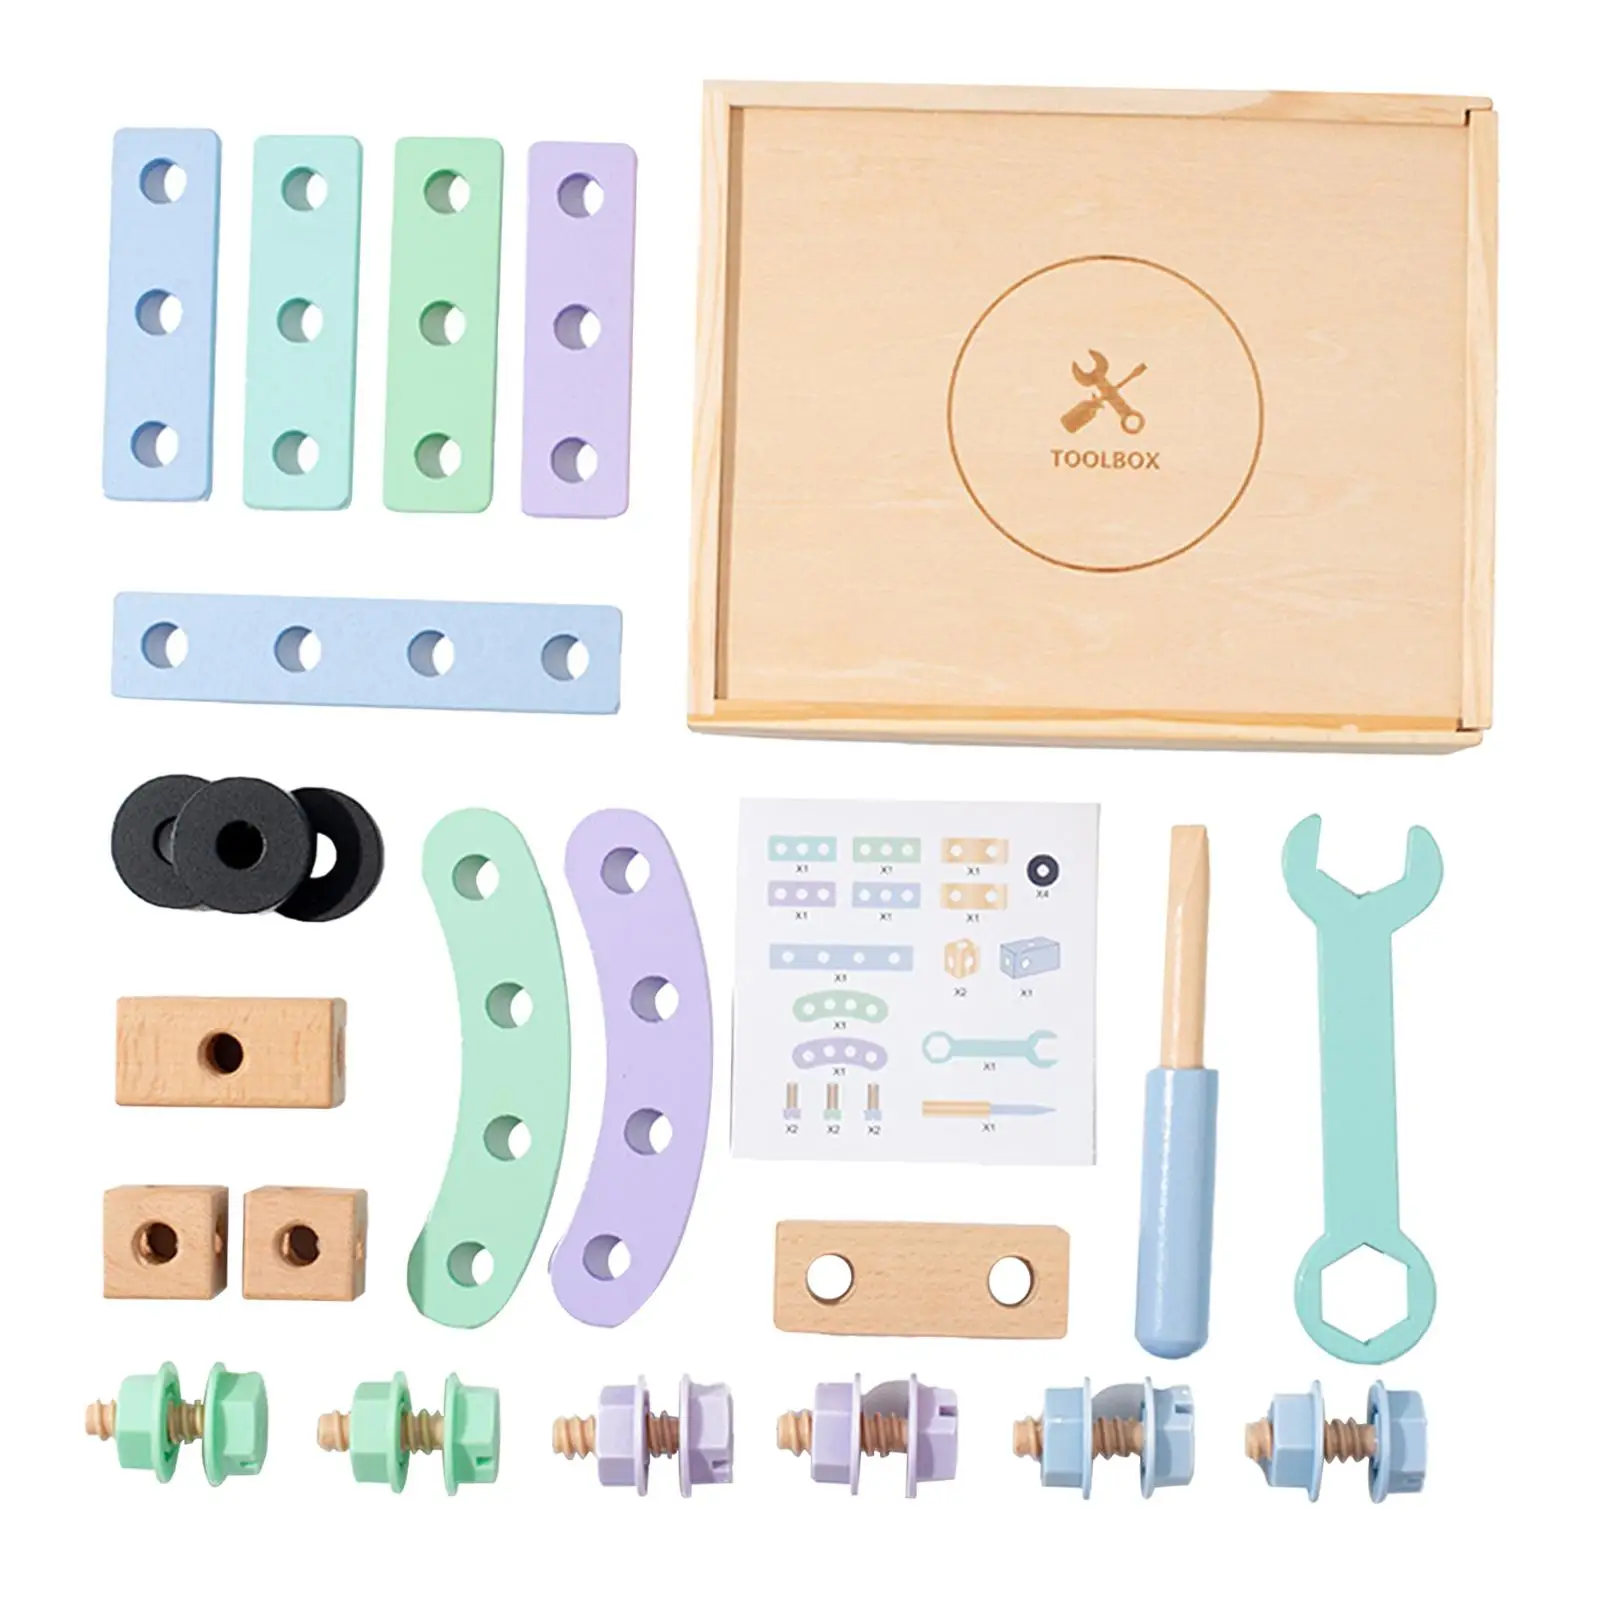 Wooden Repair Tool Box Toy Birthday Gifts Development Toy Simulation Repair Screw Toy Educational Toy for Baby Toddler Children